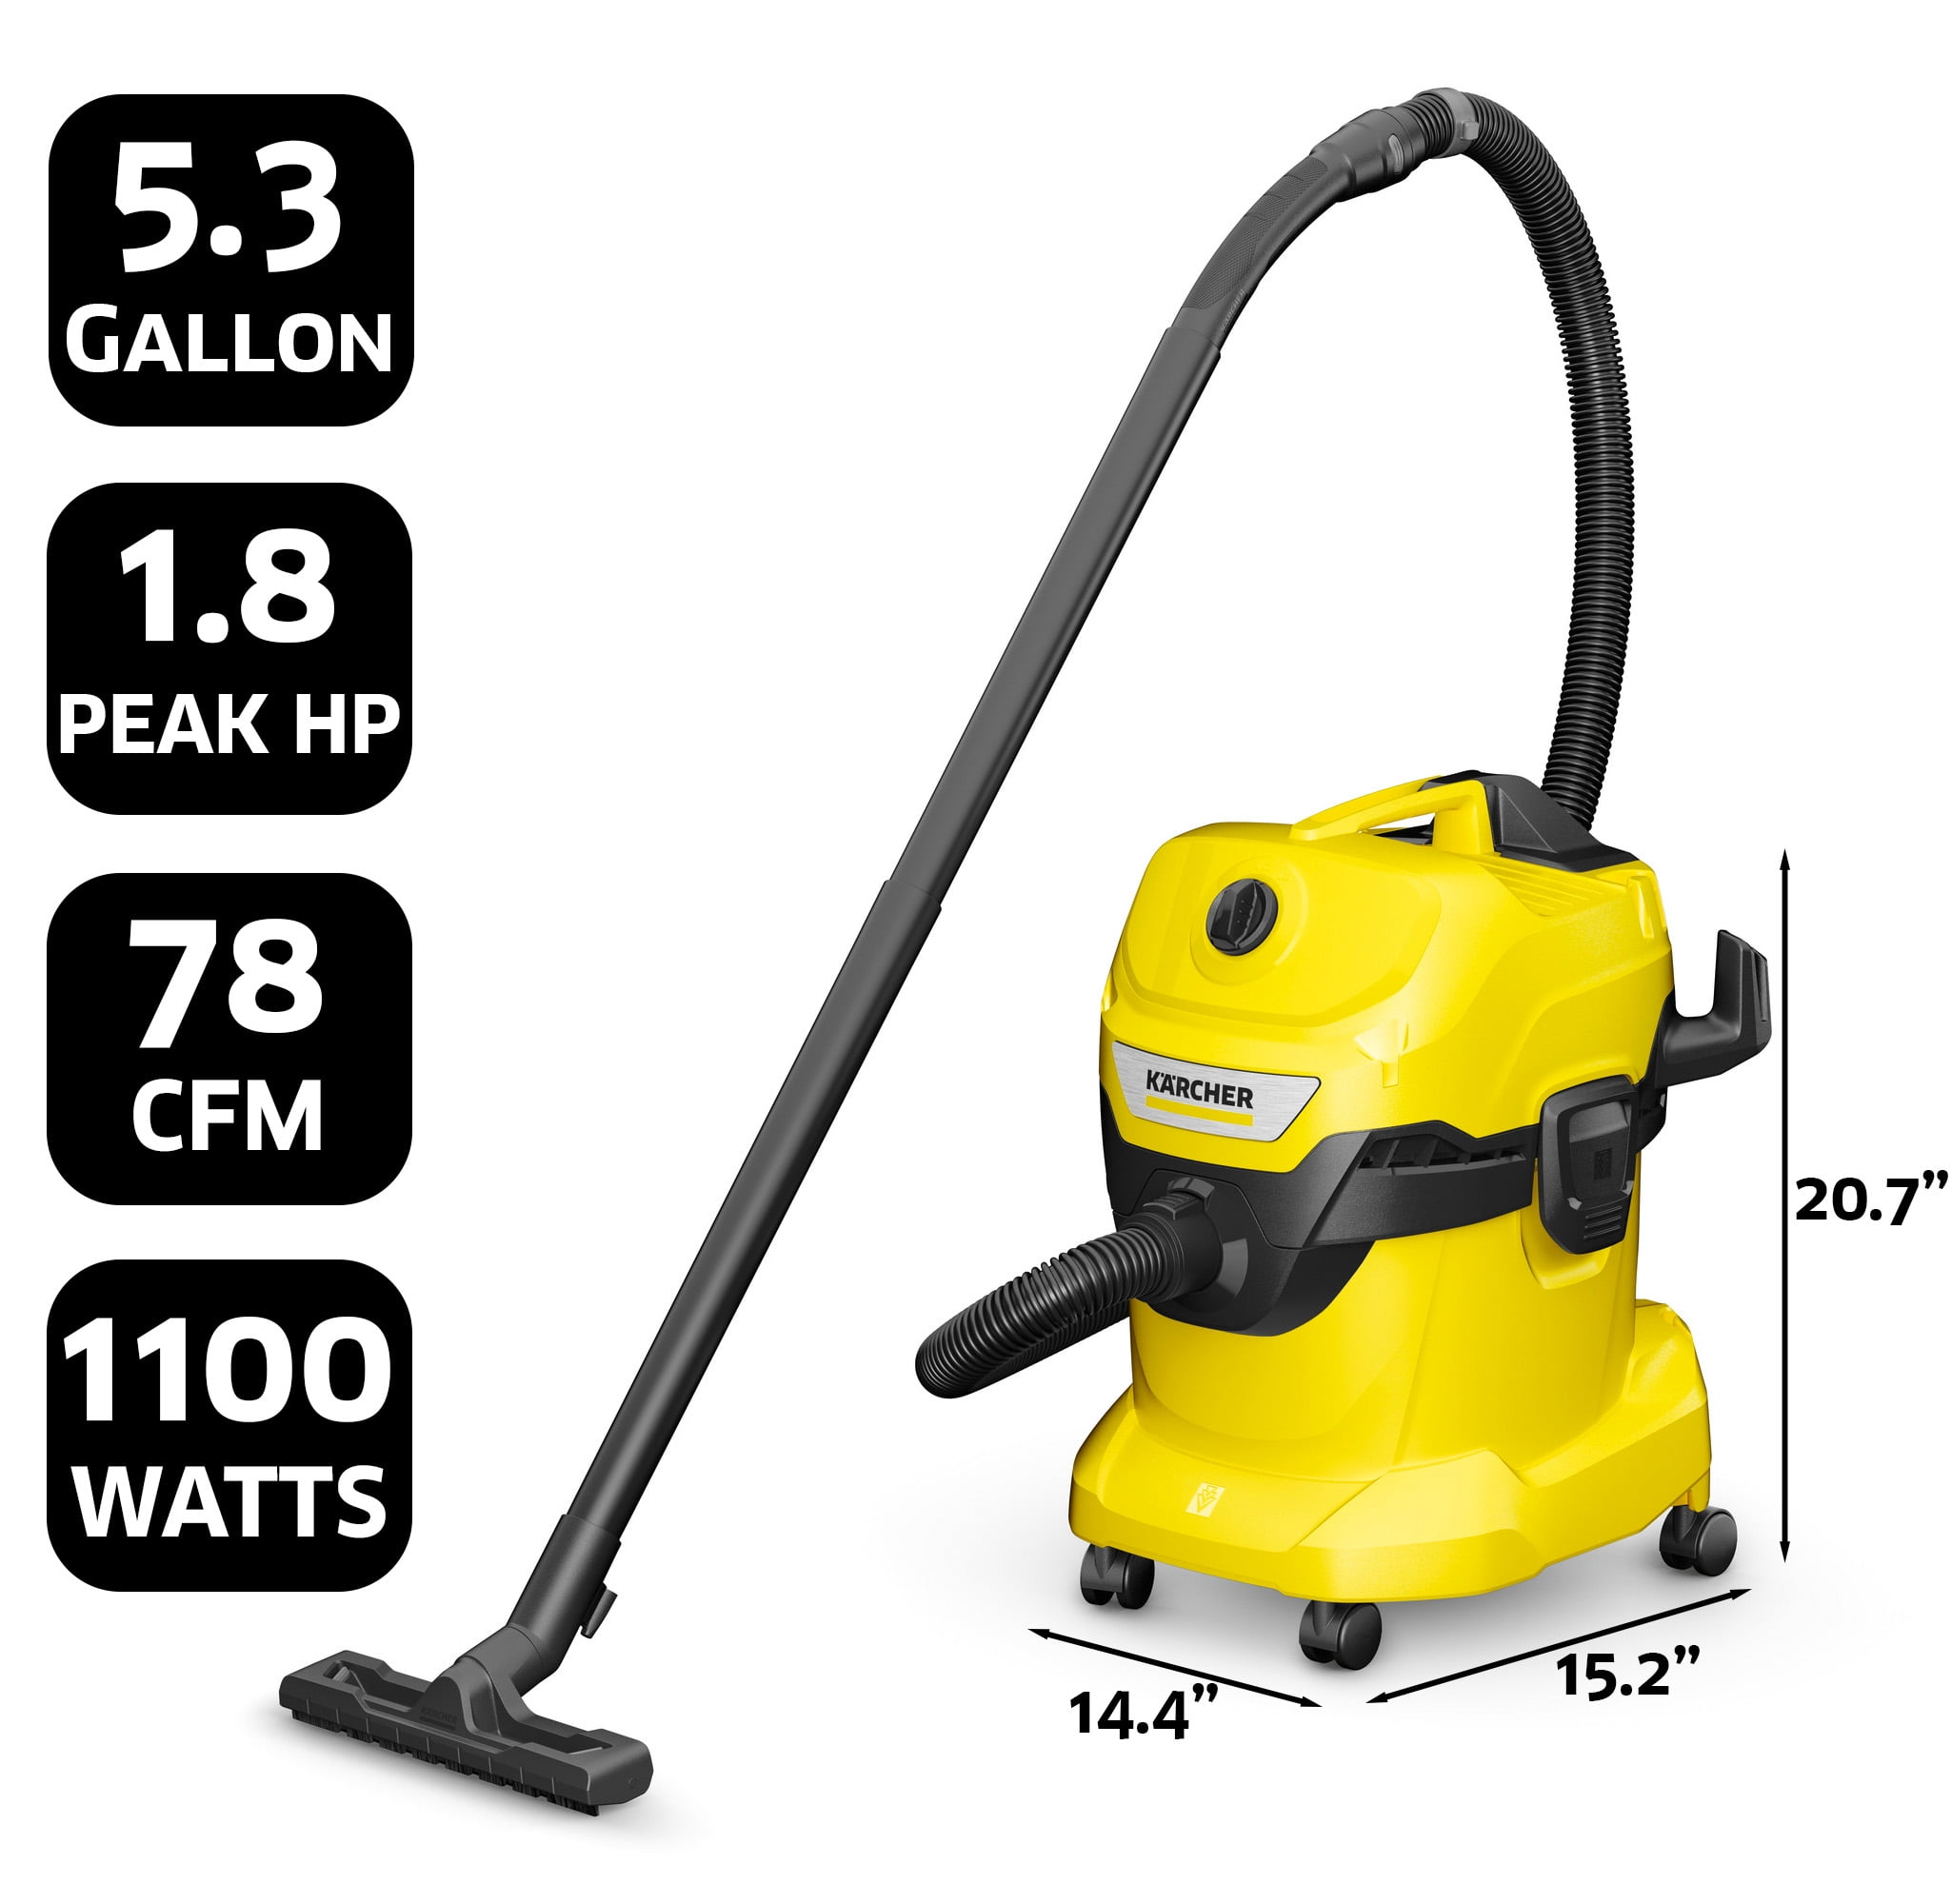 Karcher 4.5 Gallon Wet to Dry Vacuum, Blower Feature, WD3, Multi